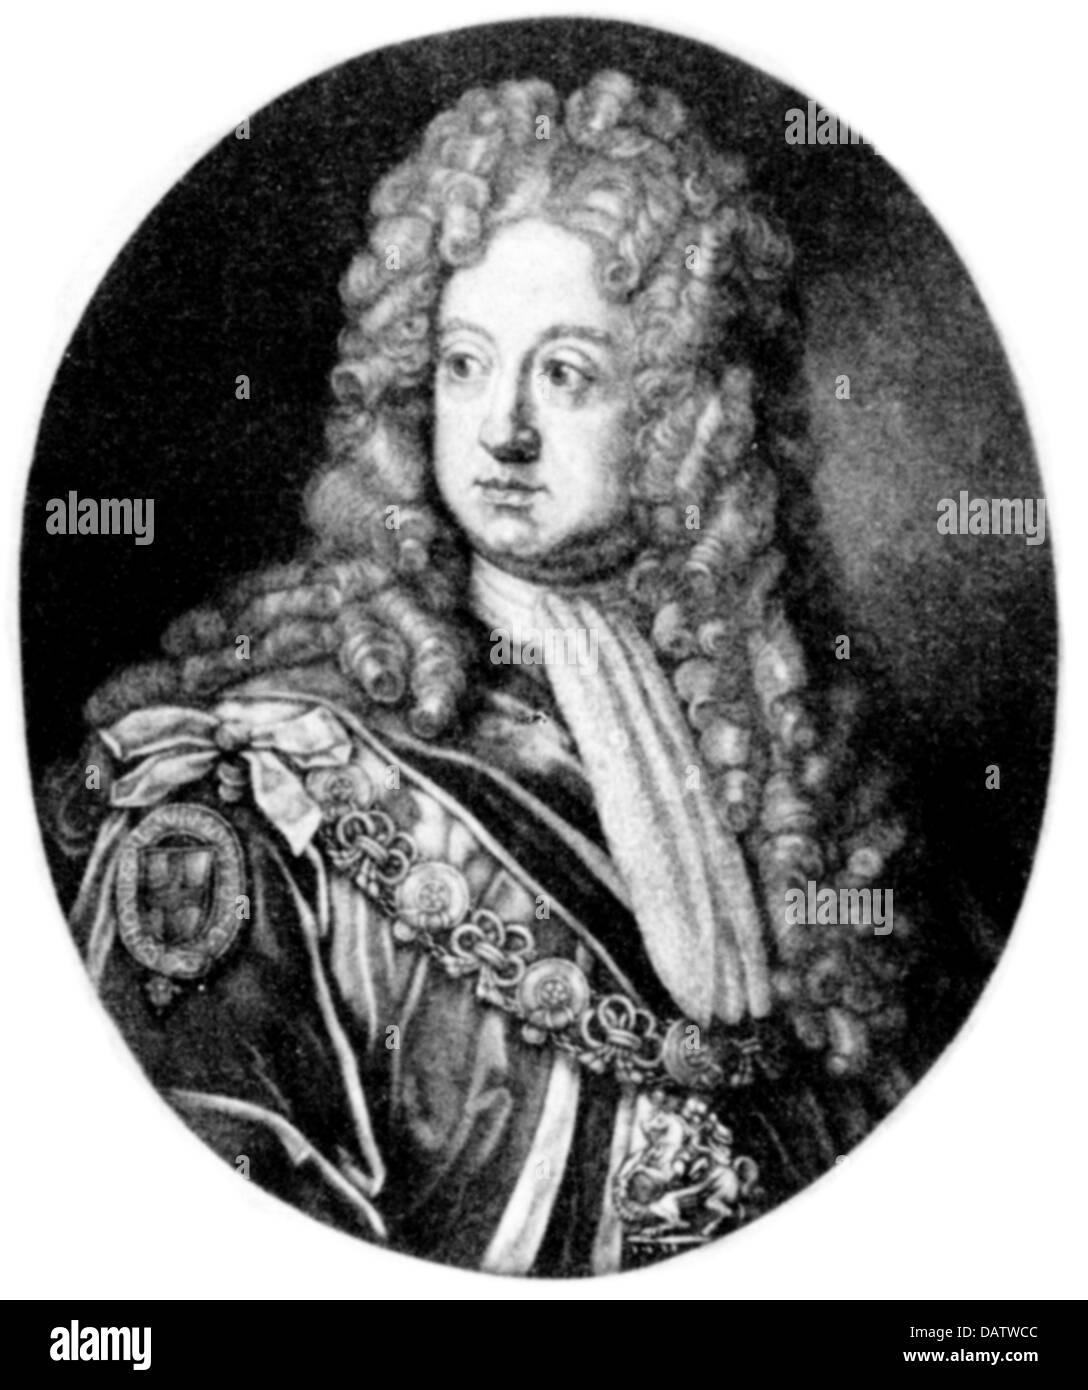 Ernest Augustus I, 30.11.1629 - 2.2.1698, Prince-Elector of Hanover 19.12.1692 - 2.2.1698, portrait, copper engraving, late 17th century, Artist's Copyright has not to be cleared Stock Photo